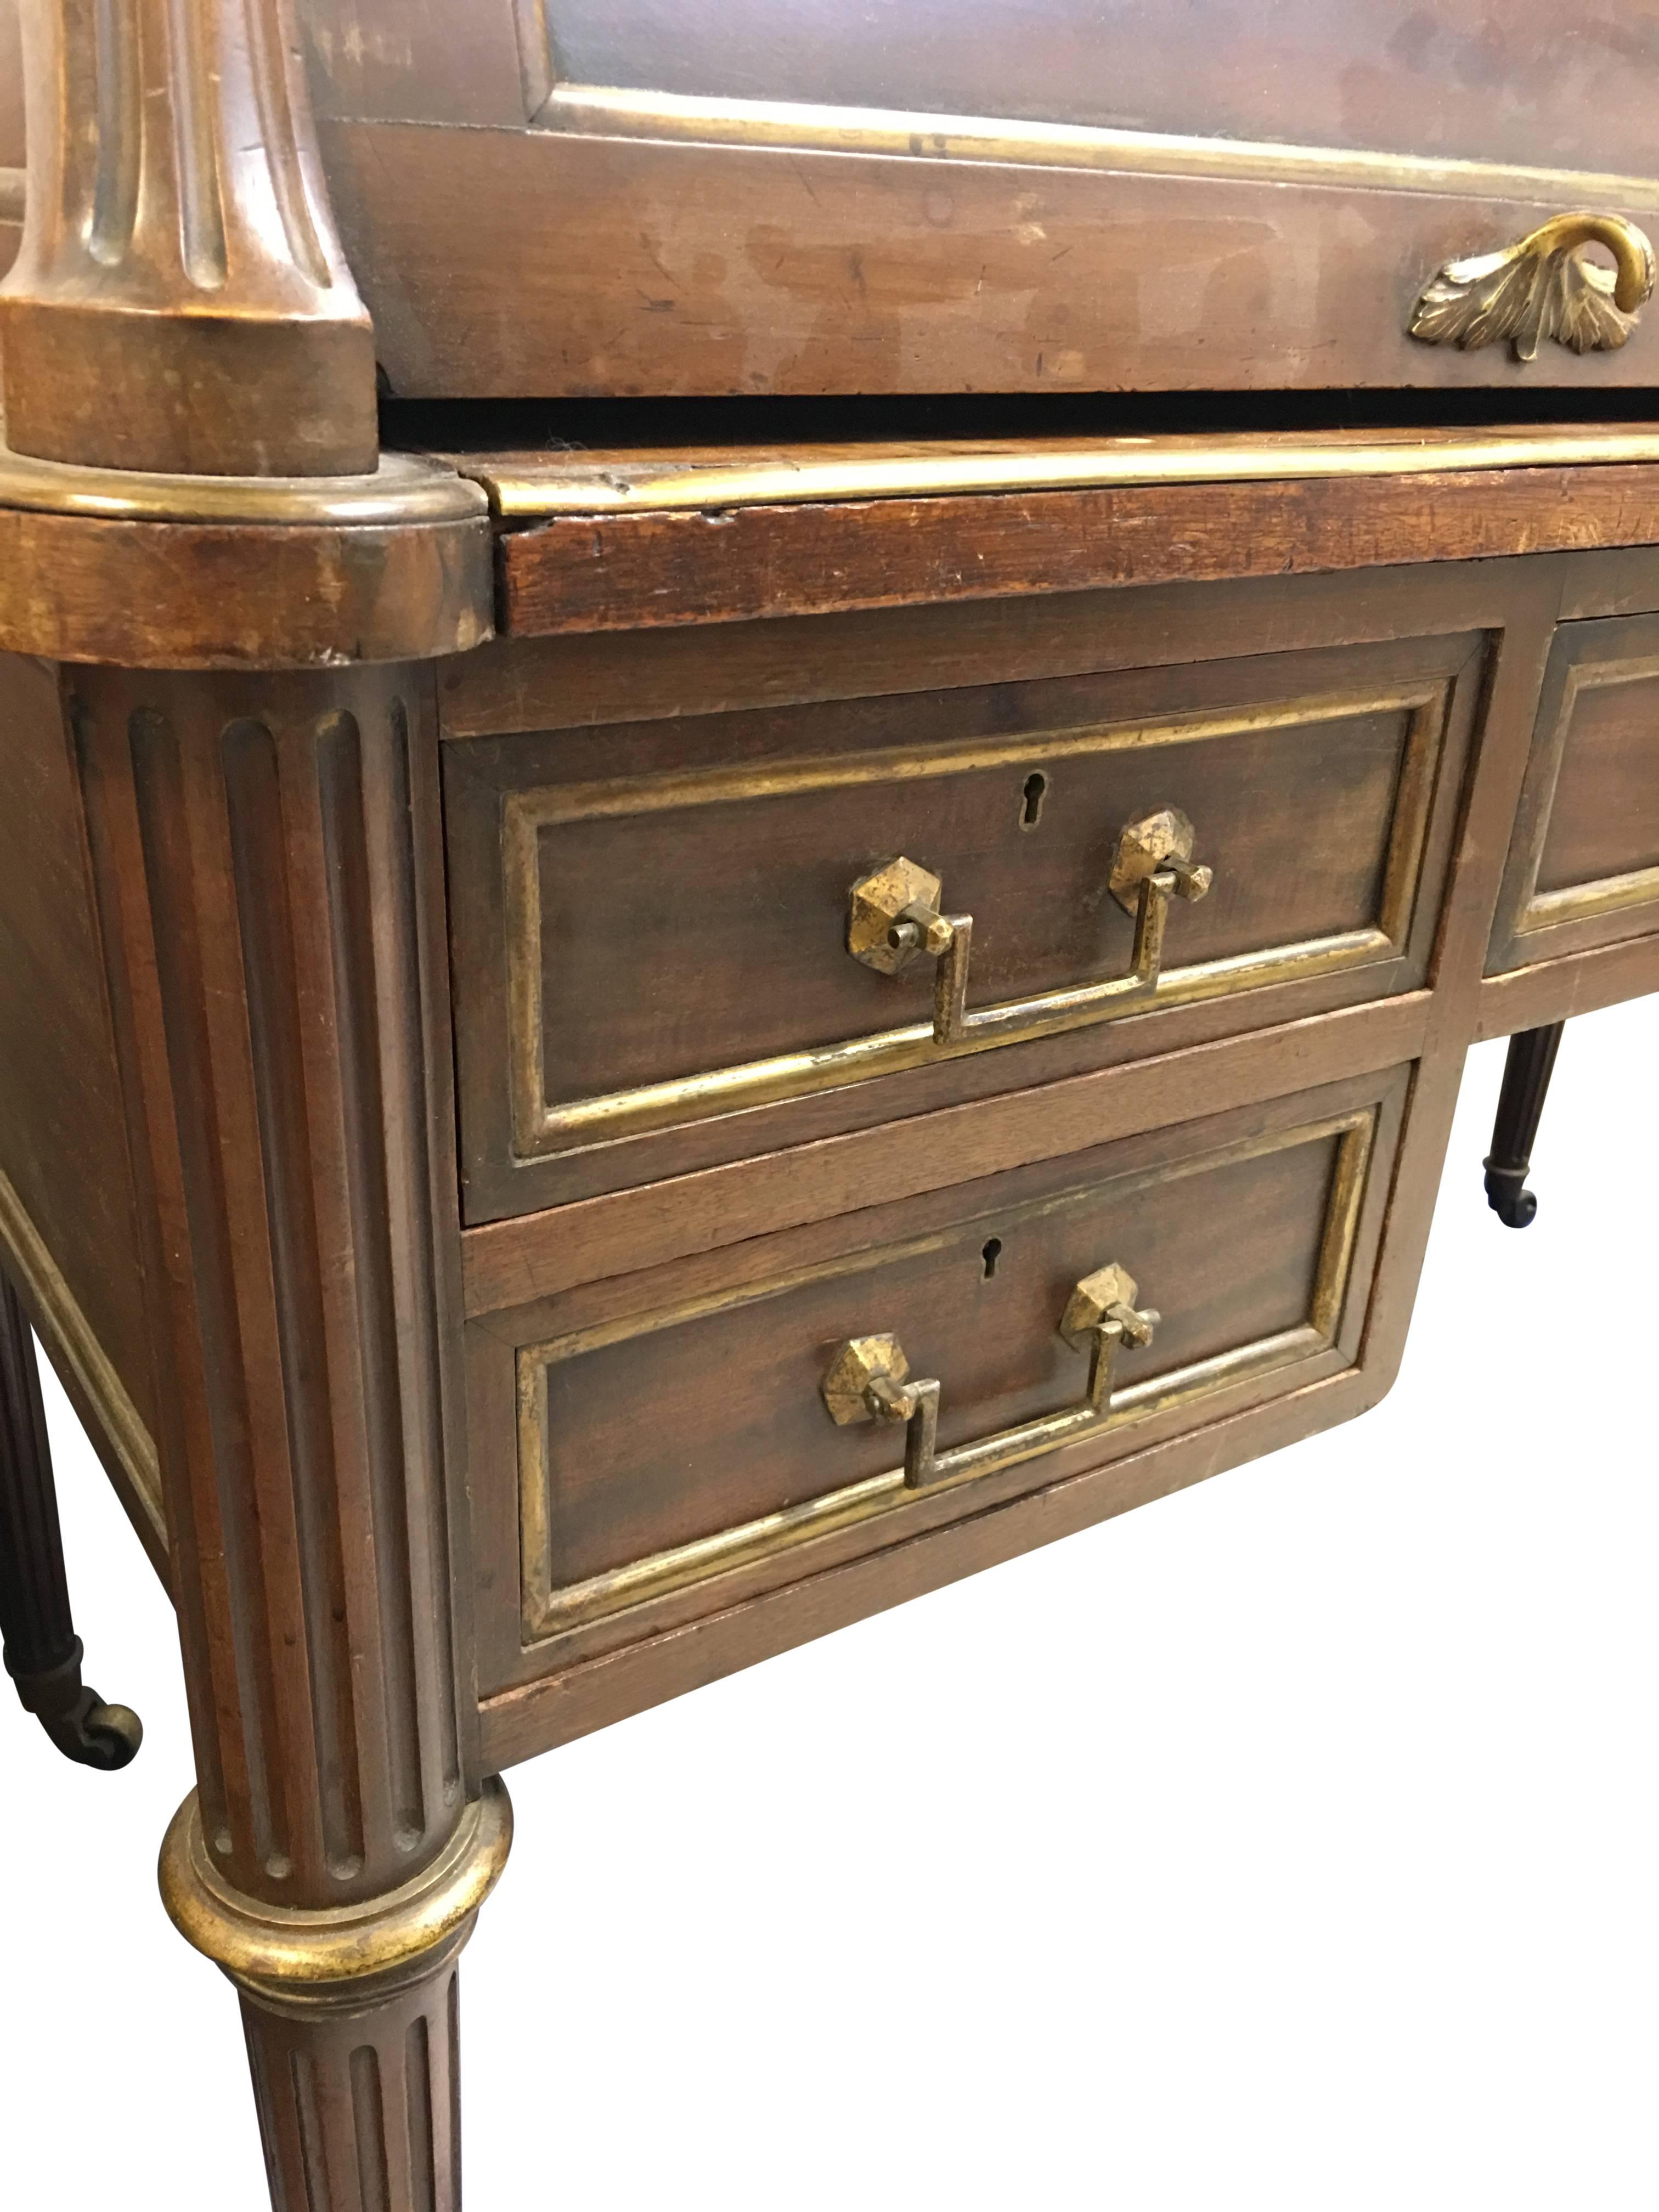 18th Century French Directoire Roll-Top Writing Desk From Savoy Hotel In London